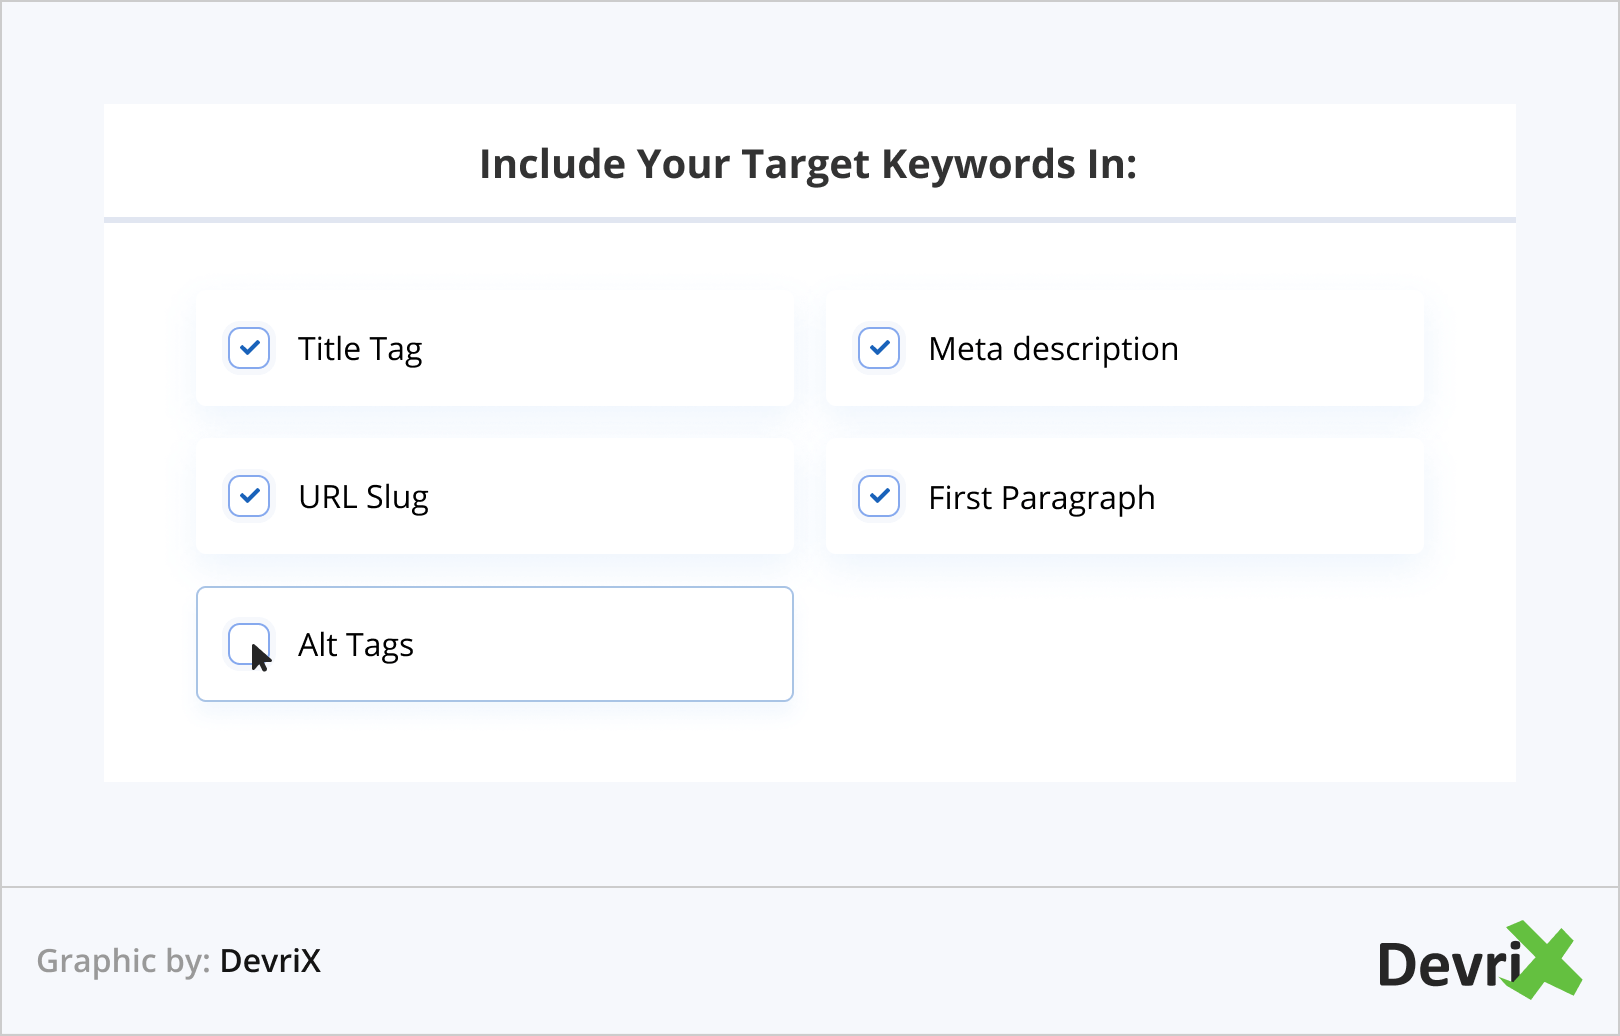 Include Your Target Keywords In